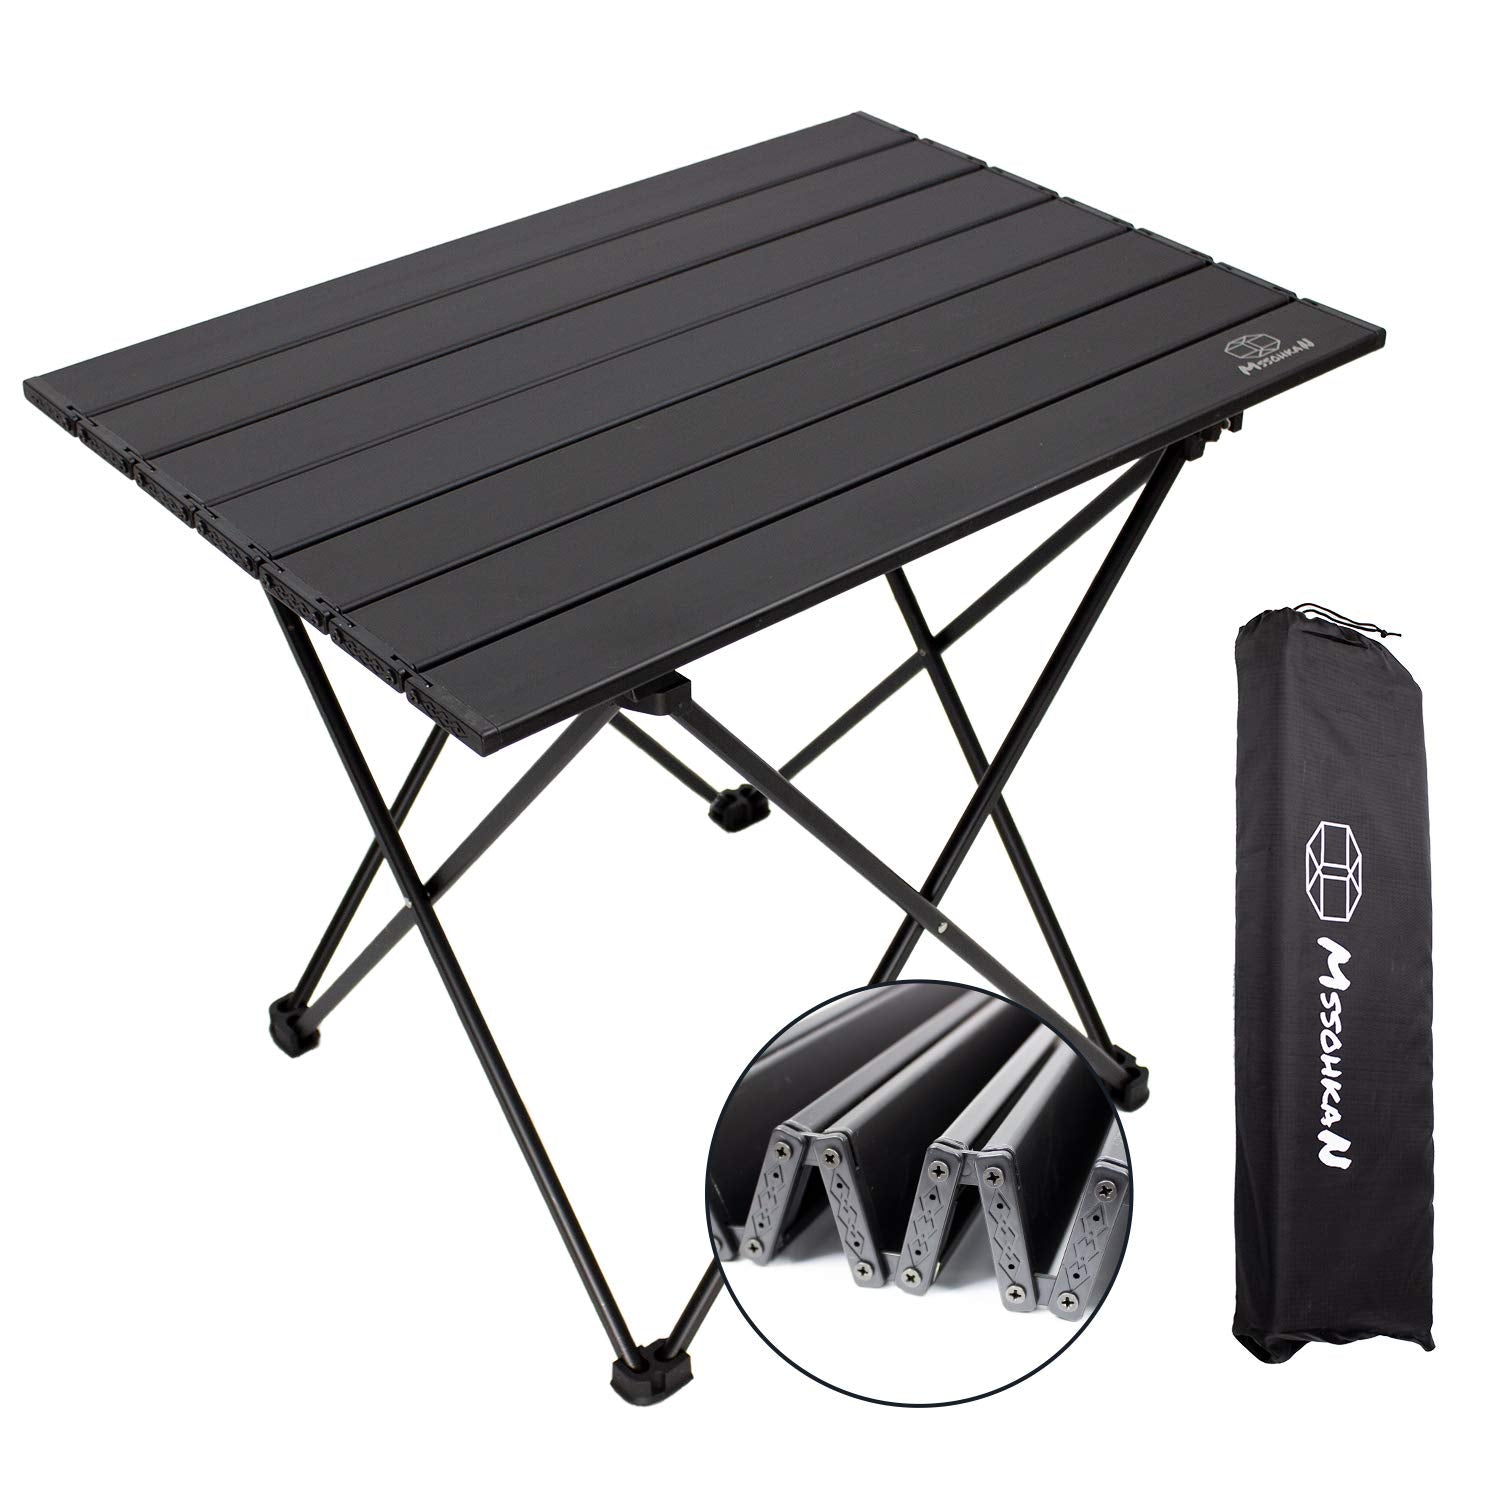 PORTAL Outdoor Folding Portable Picnic Camping Table with Adjustable Height  Aluminum Roll Up Table Top Mesh Layer, Silver